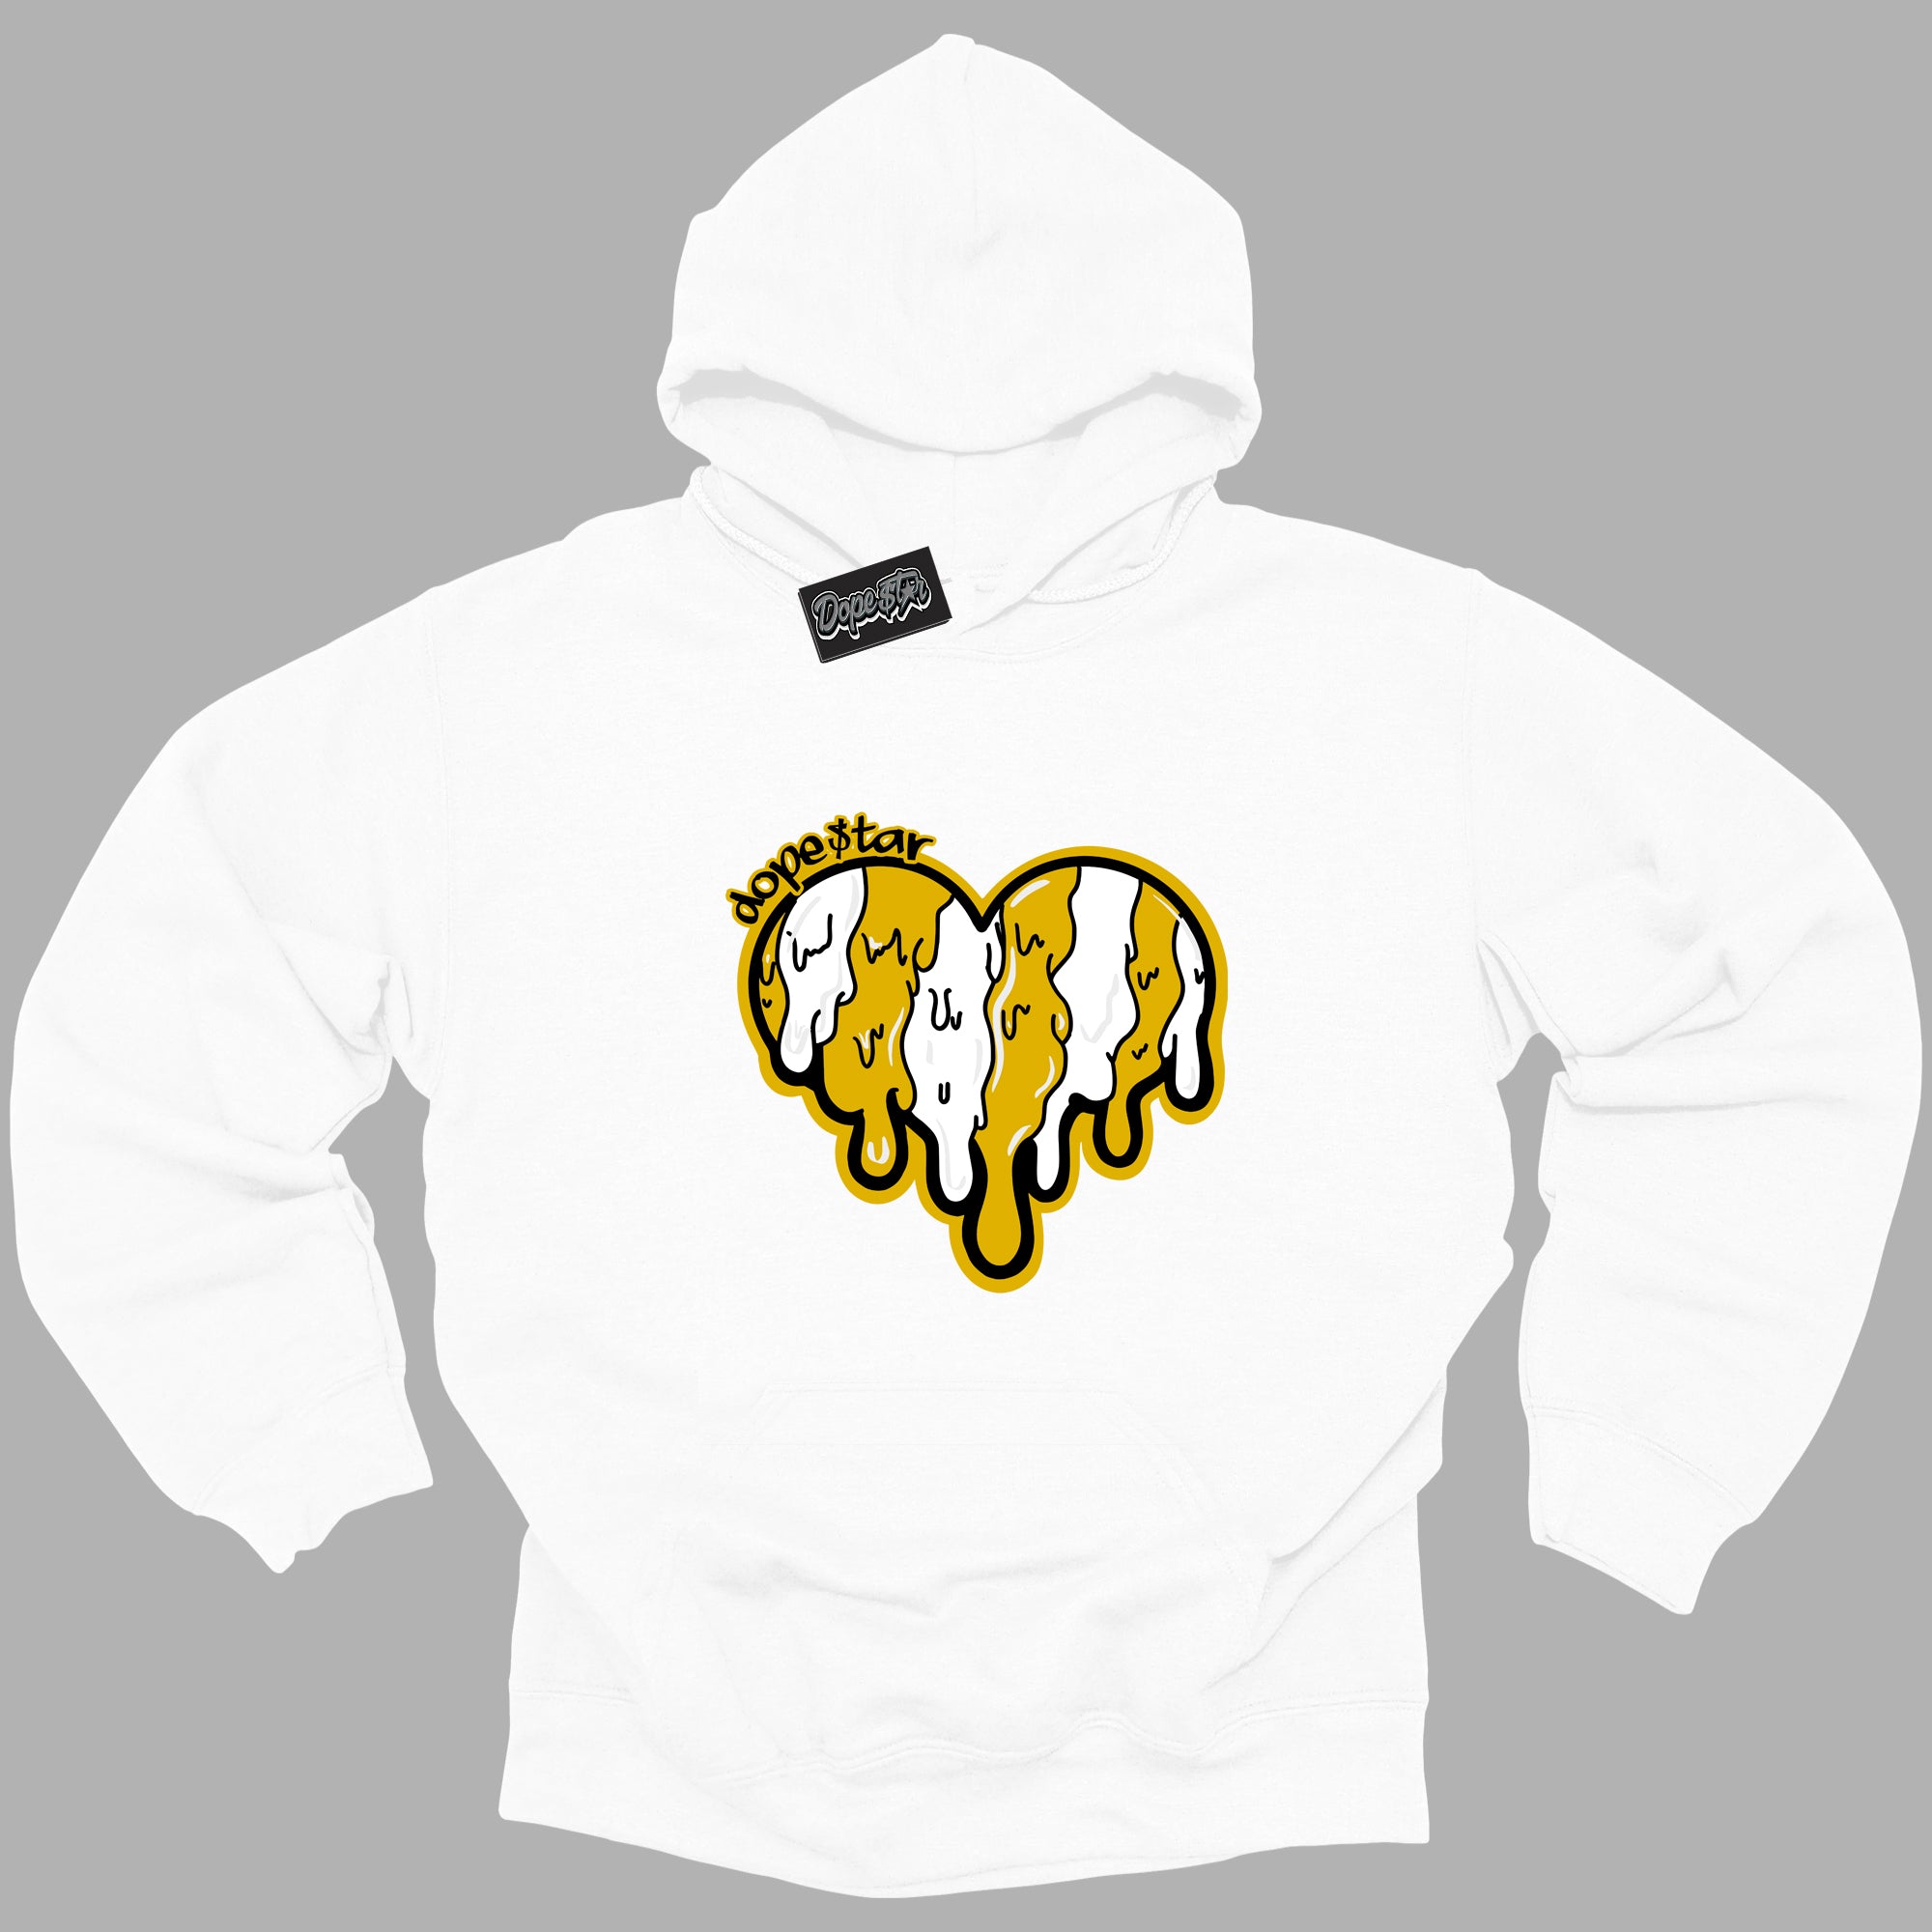 Cool White Hoodie with “ Melting Heart ”  design that Perfectly Matches Yellow Ochre 6s Sneakers.